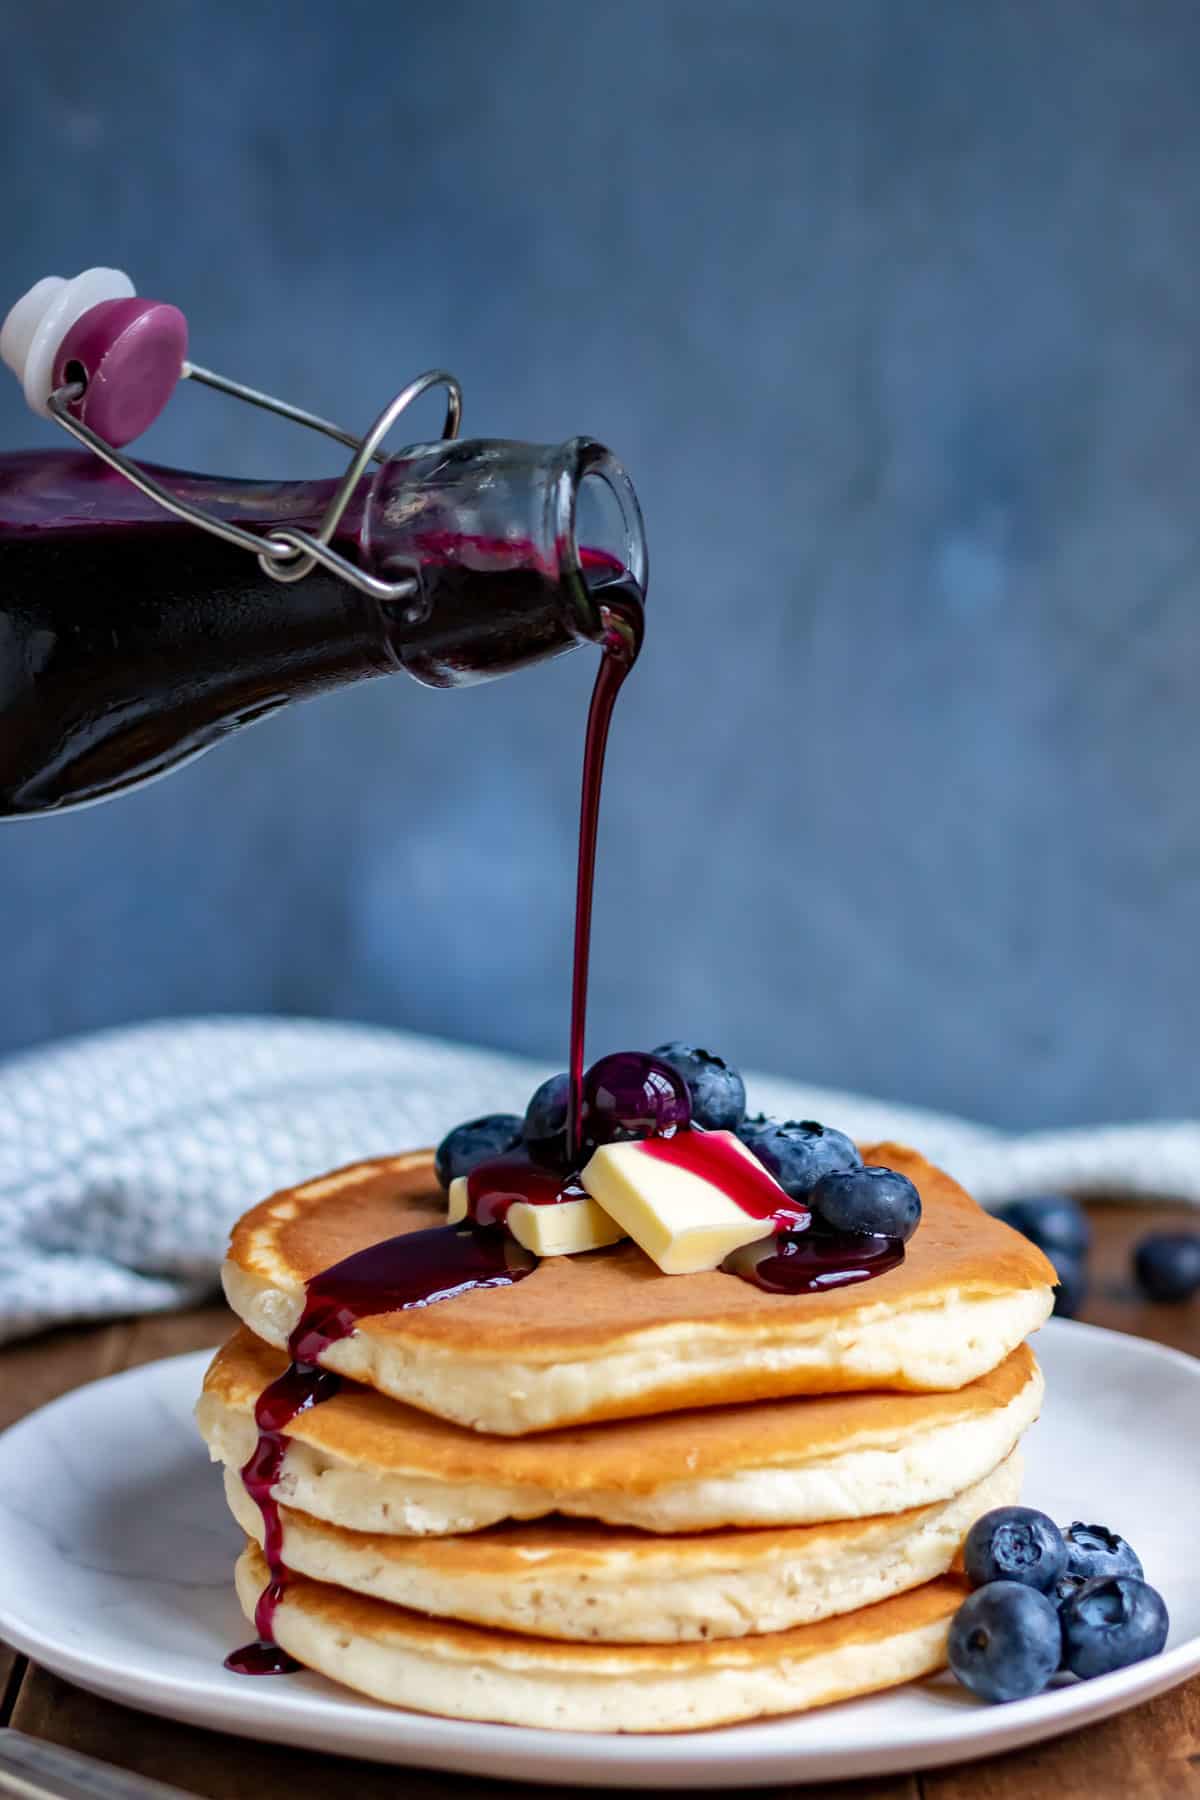 Pouring blueberry syrup onto pancakes.